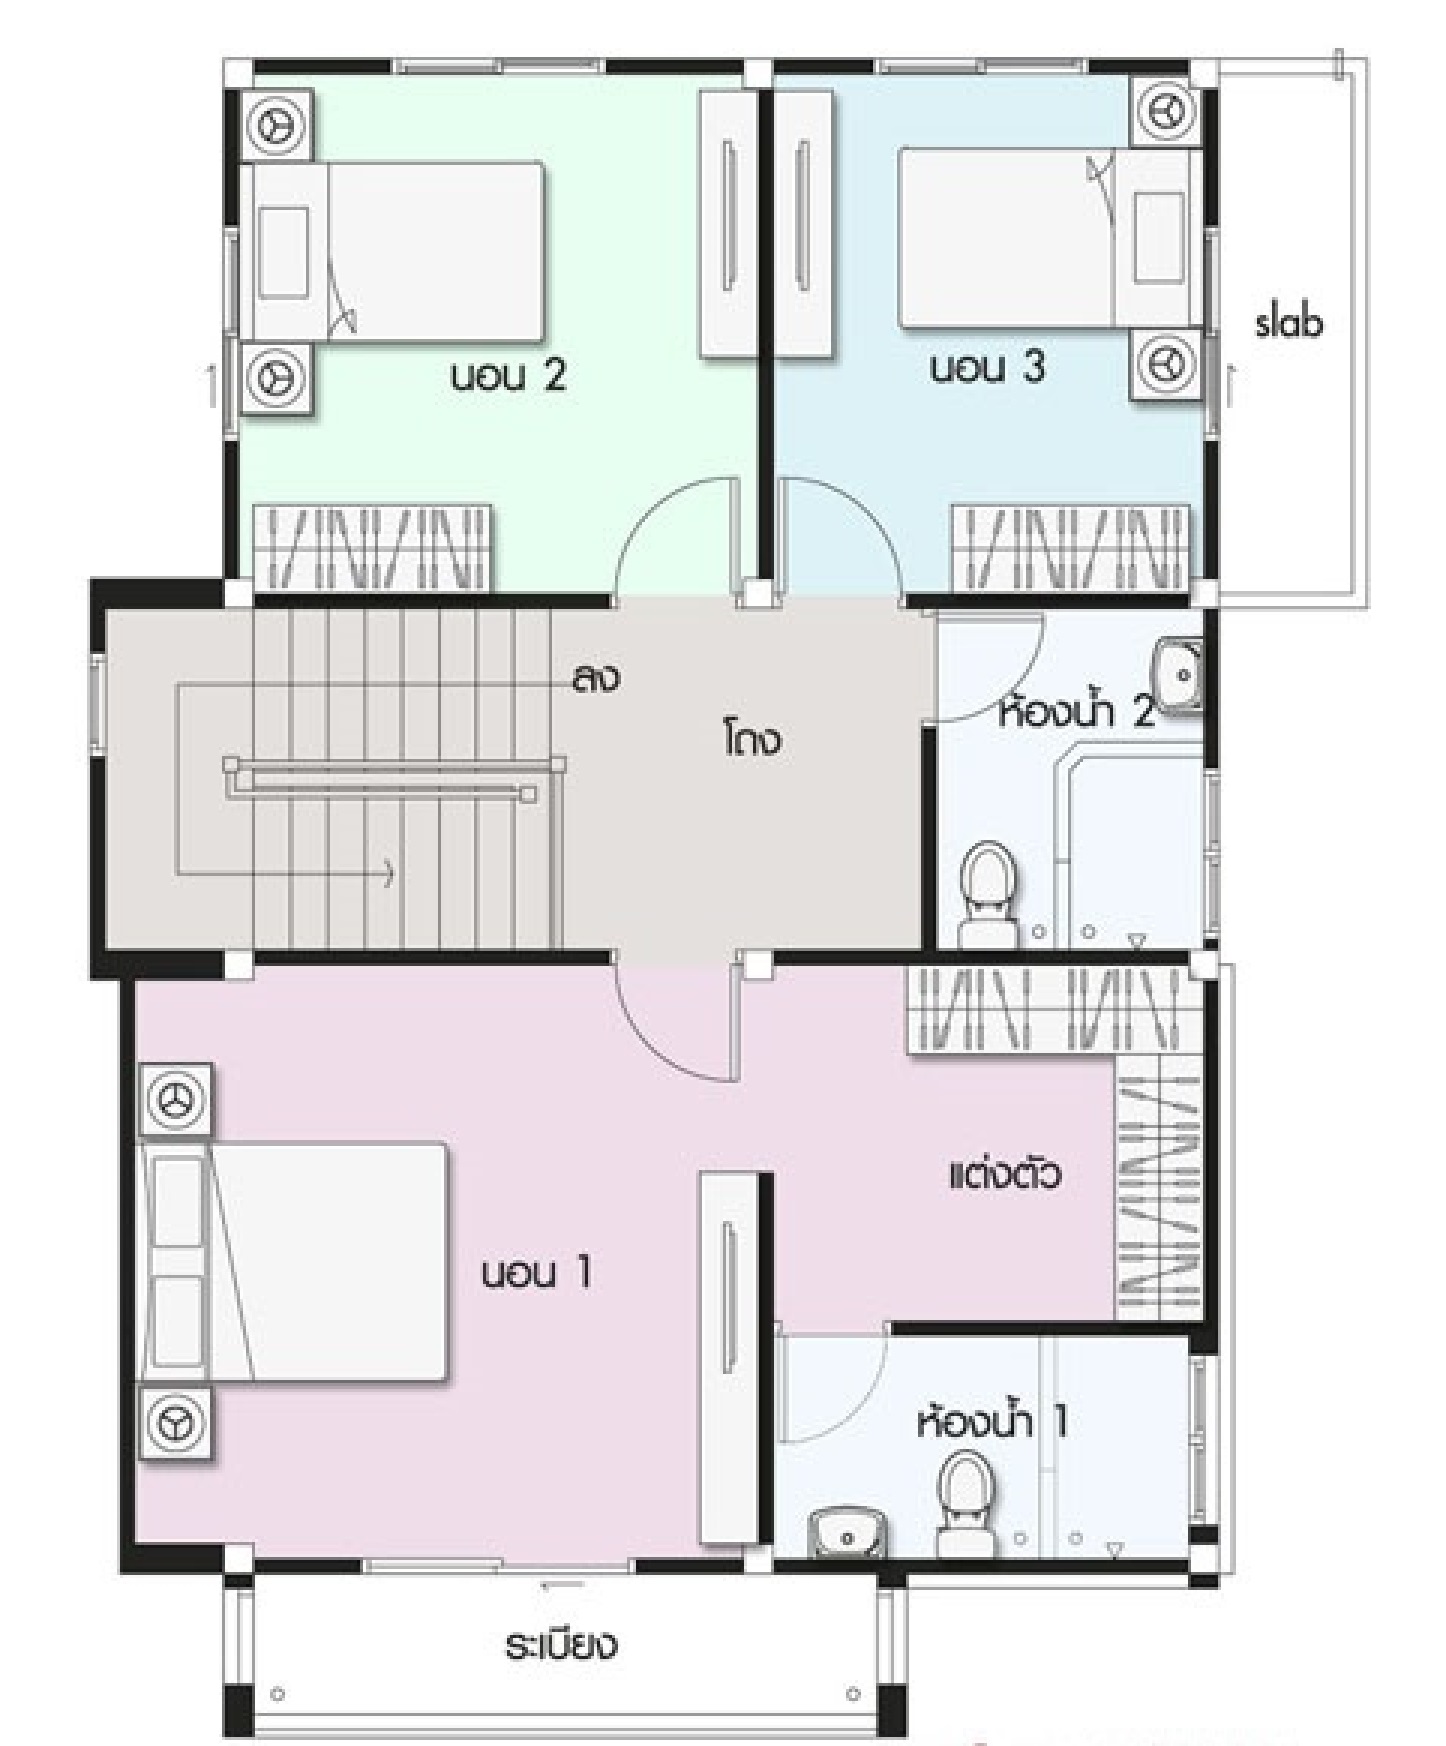 House design plan 6.5x11.2m with 3 bedrooms